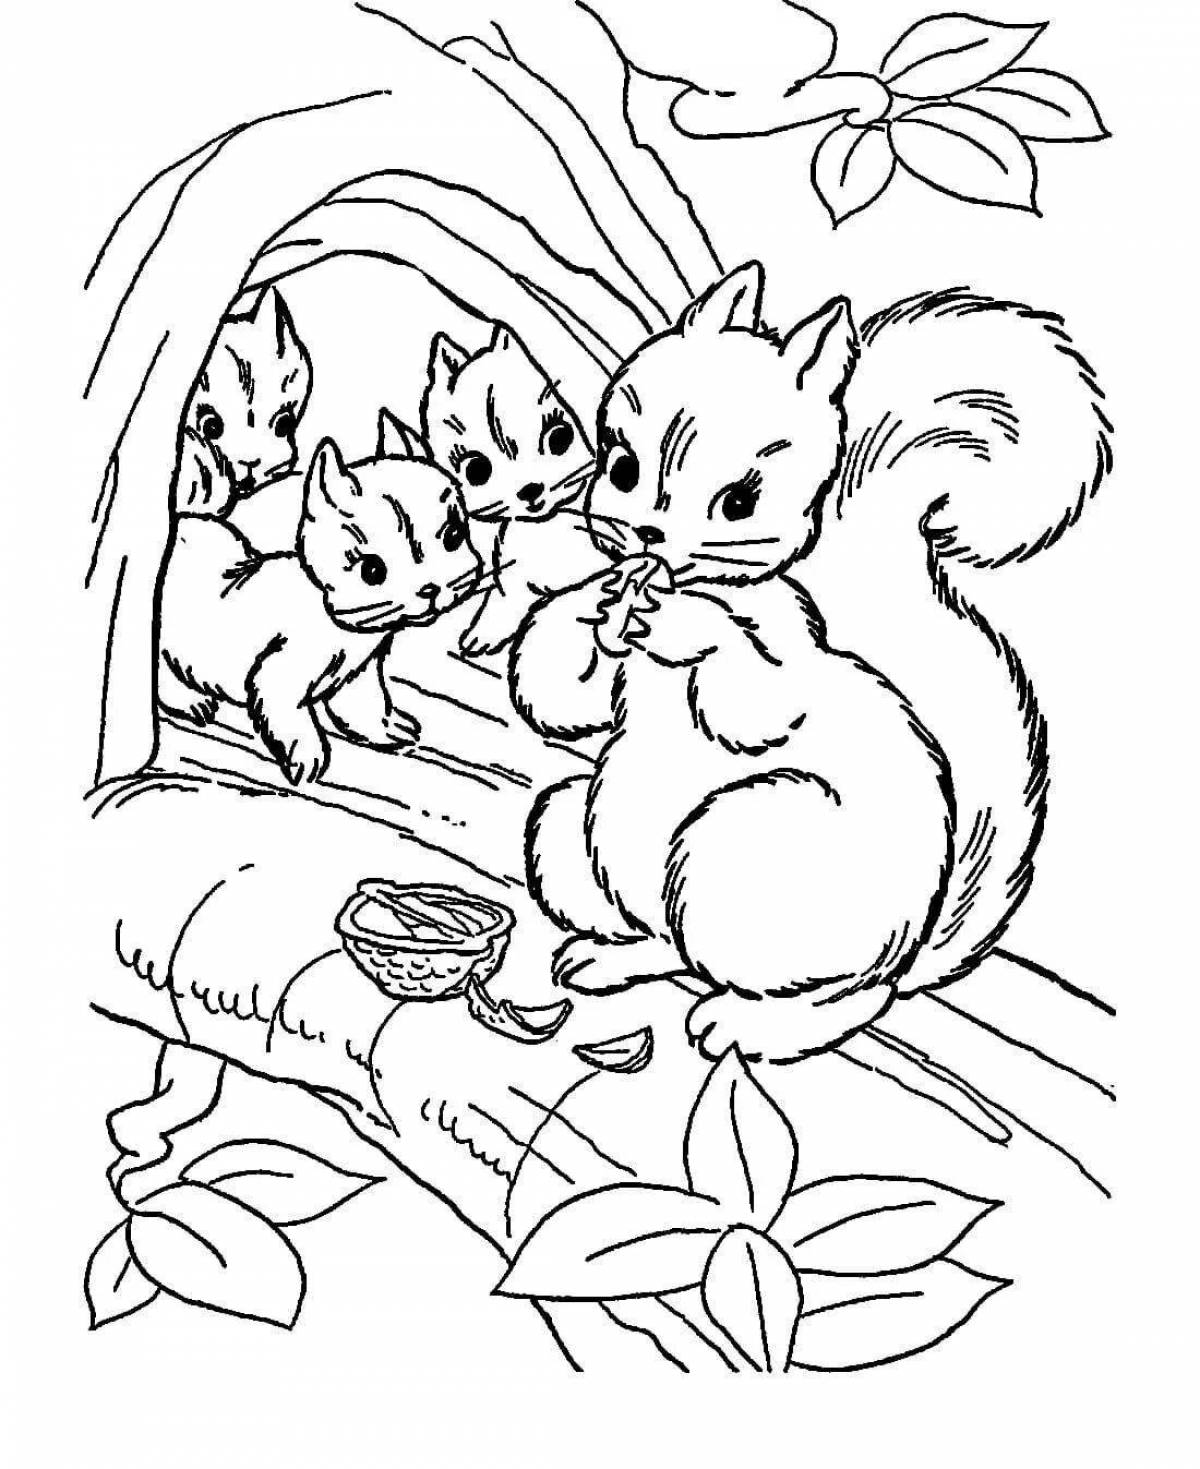 Animated squirrel coloring book for children 6-7 years old